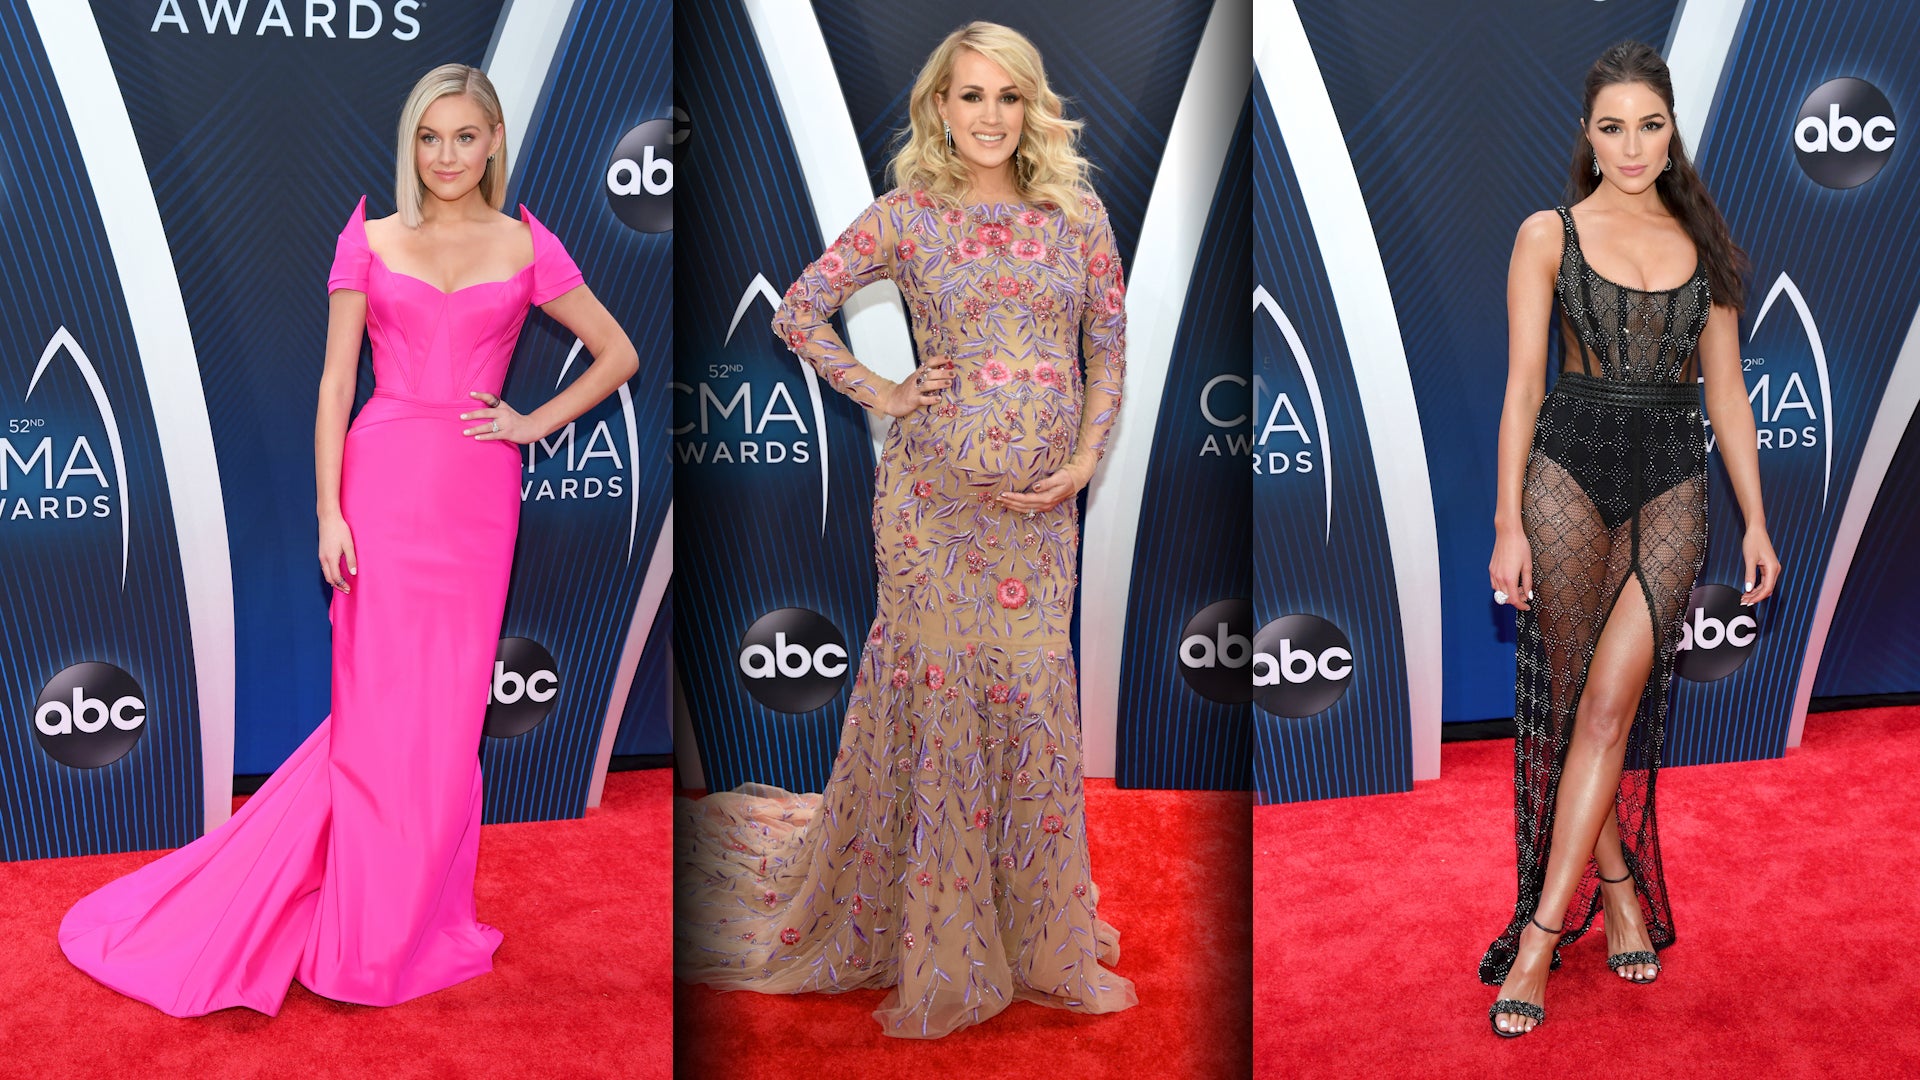 Carrie Underwood Shines in Second Outfit at ACM Awards 2018: Photo 4065639, 2018 ACM Awards, ACM Awards, Carrie Underwood Photos